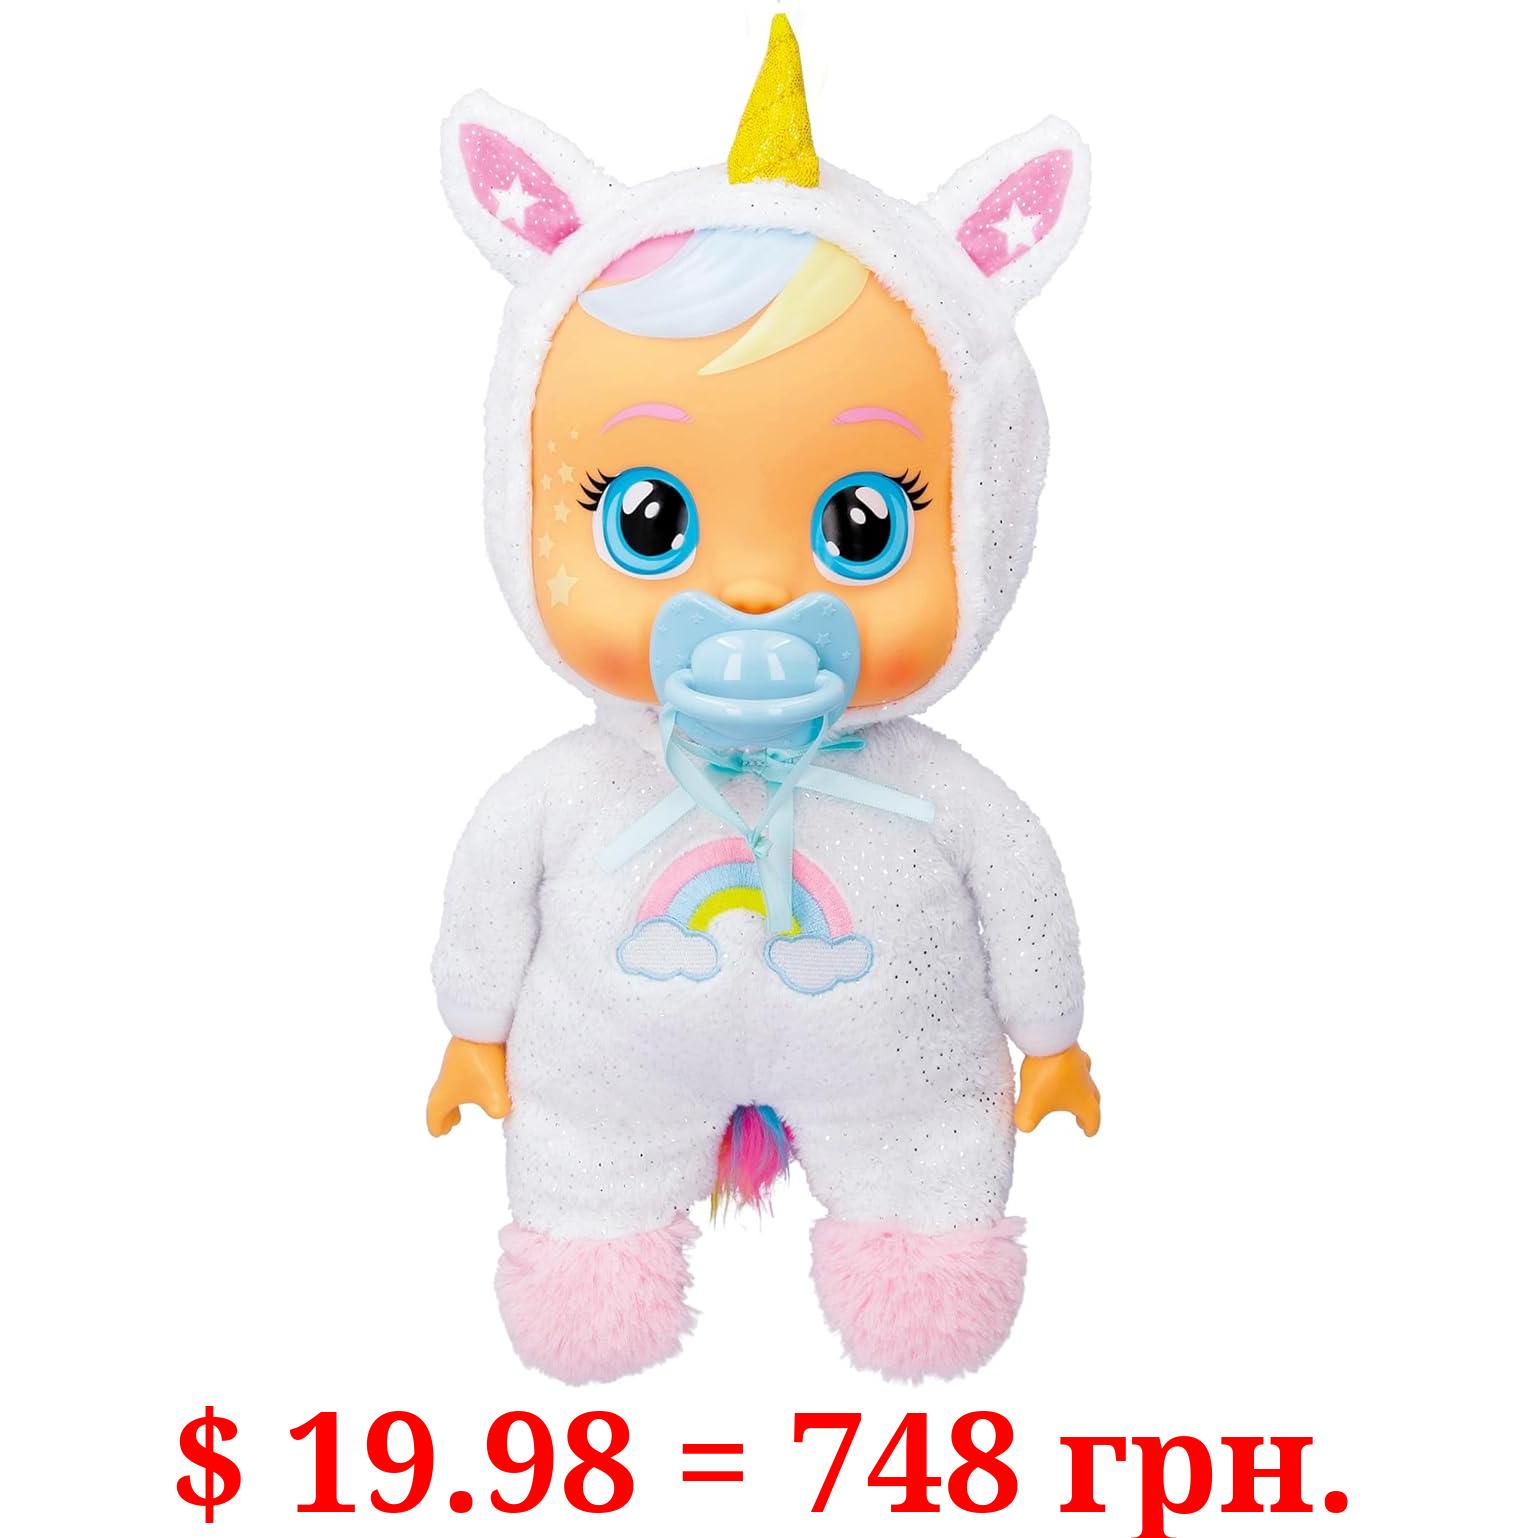 Cry Babies Goodnight Dreamy - Sleepy Time Baby Doll with LED Lights, for Girls and Boys Ages 18M and Up